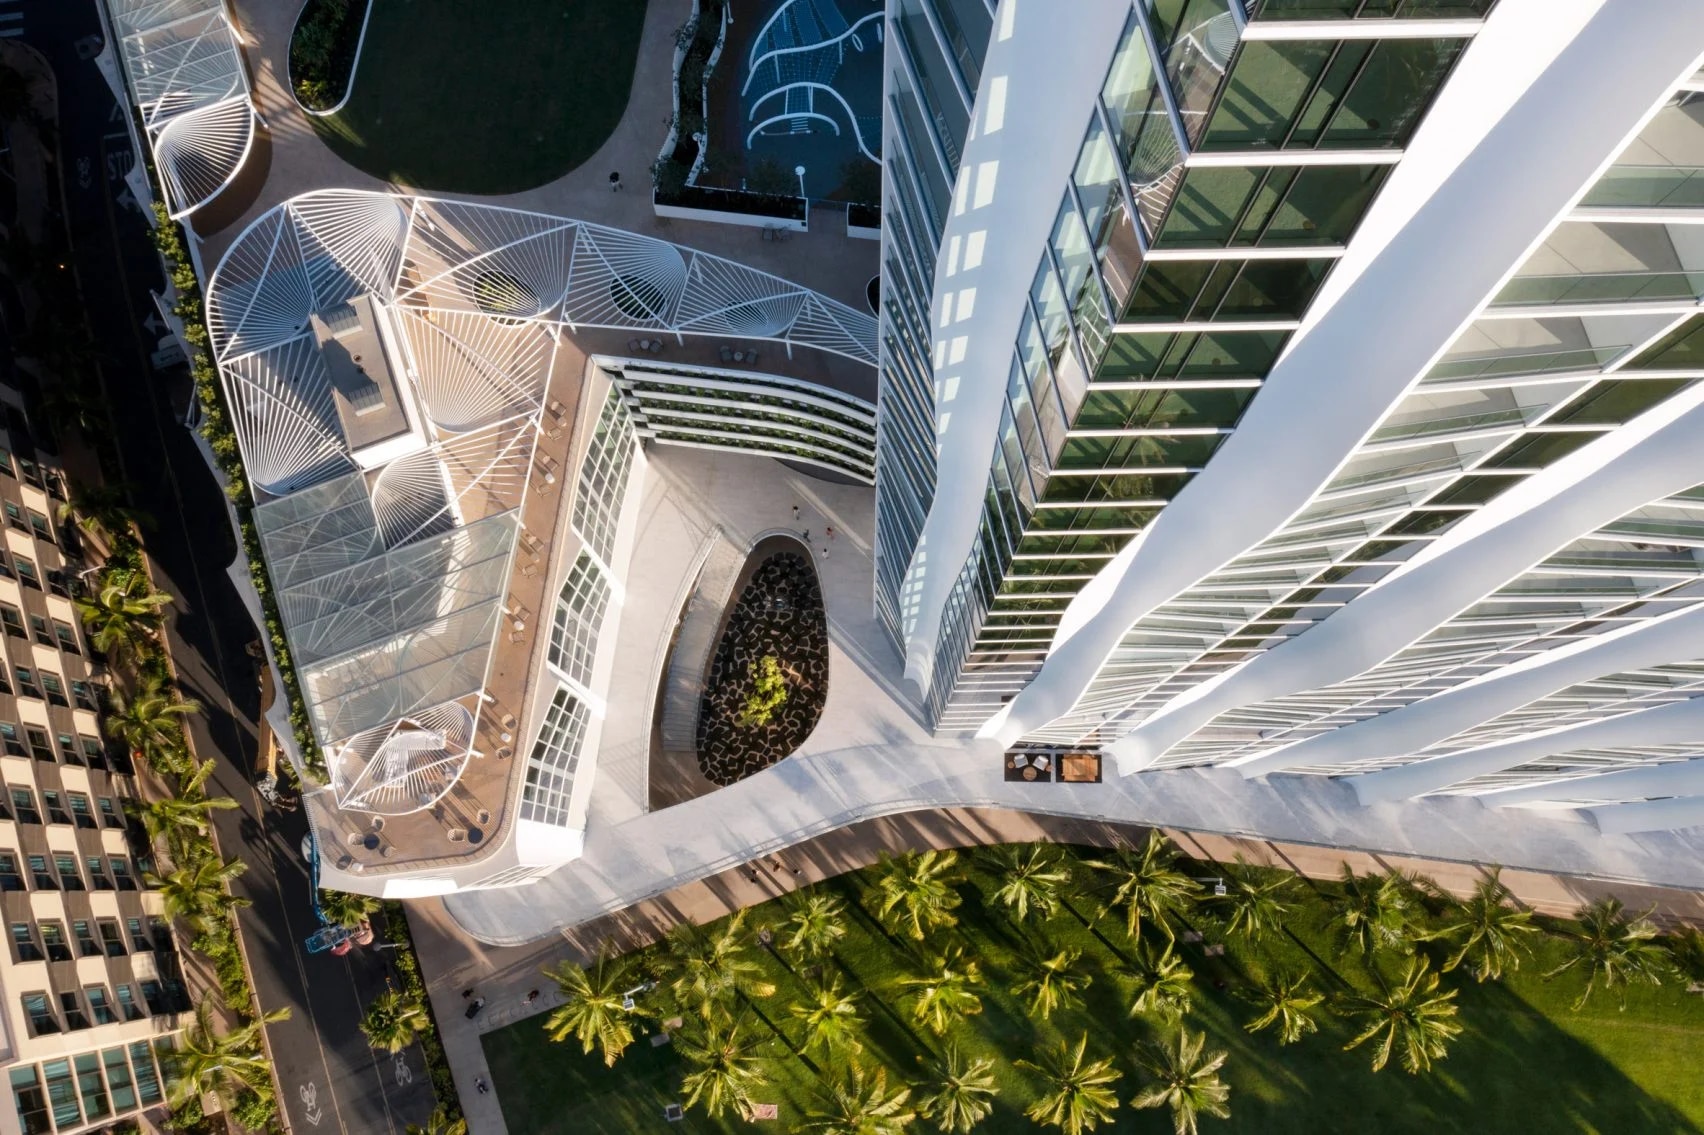 Studio Gang has completed tower in Hawaii inspired by local sugar